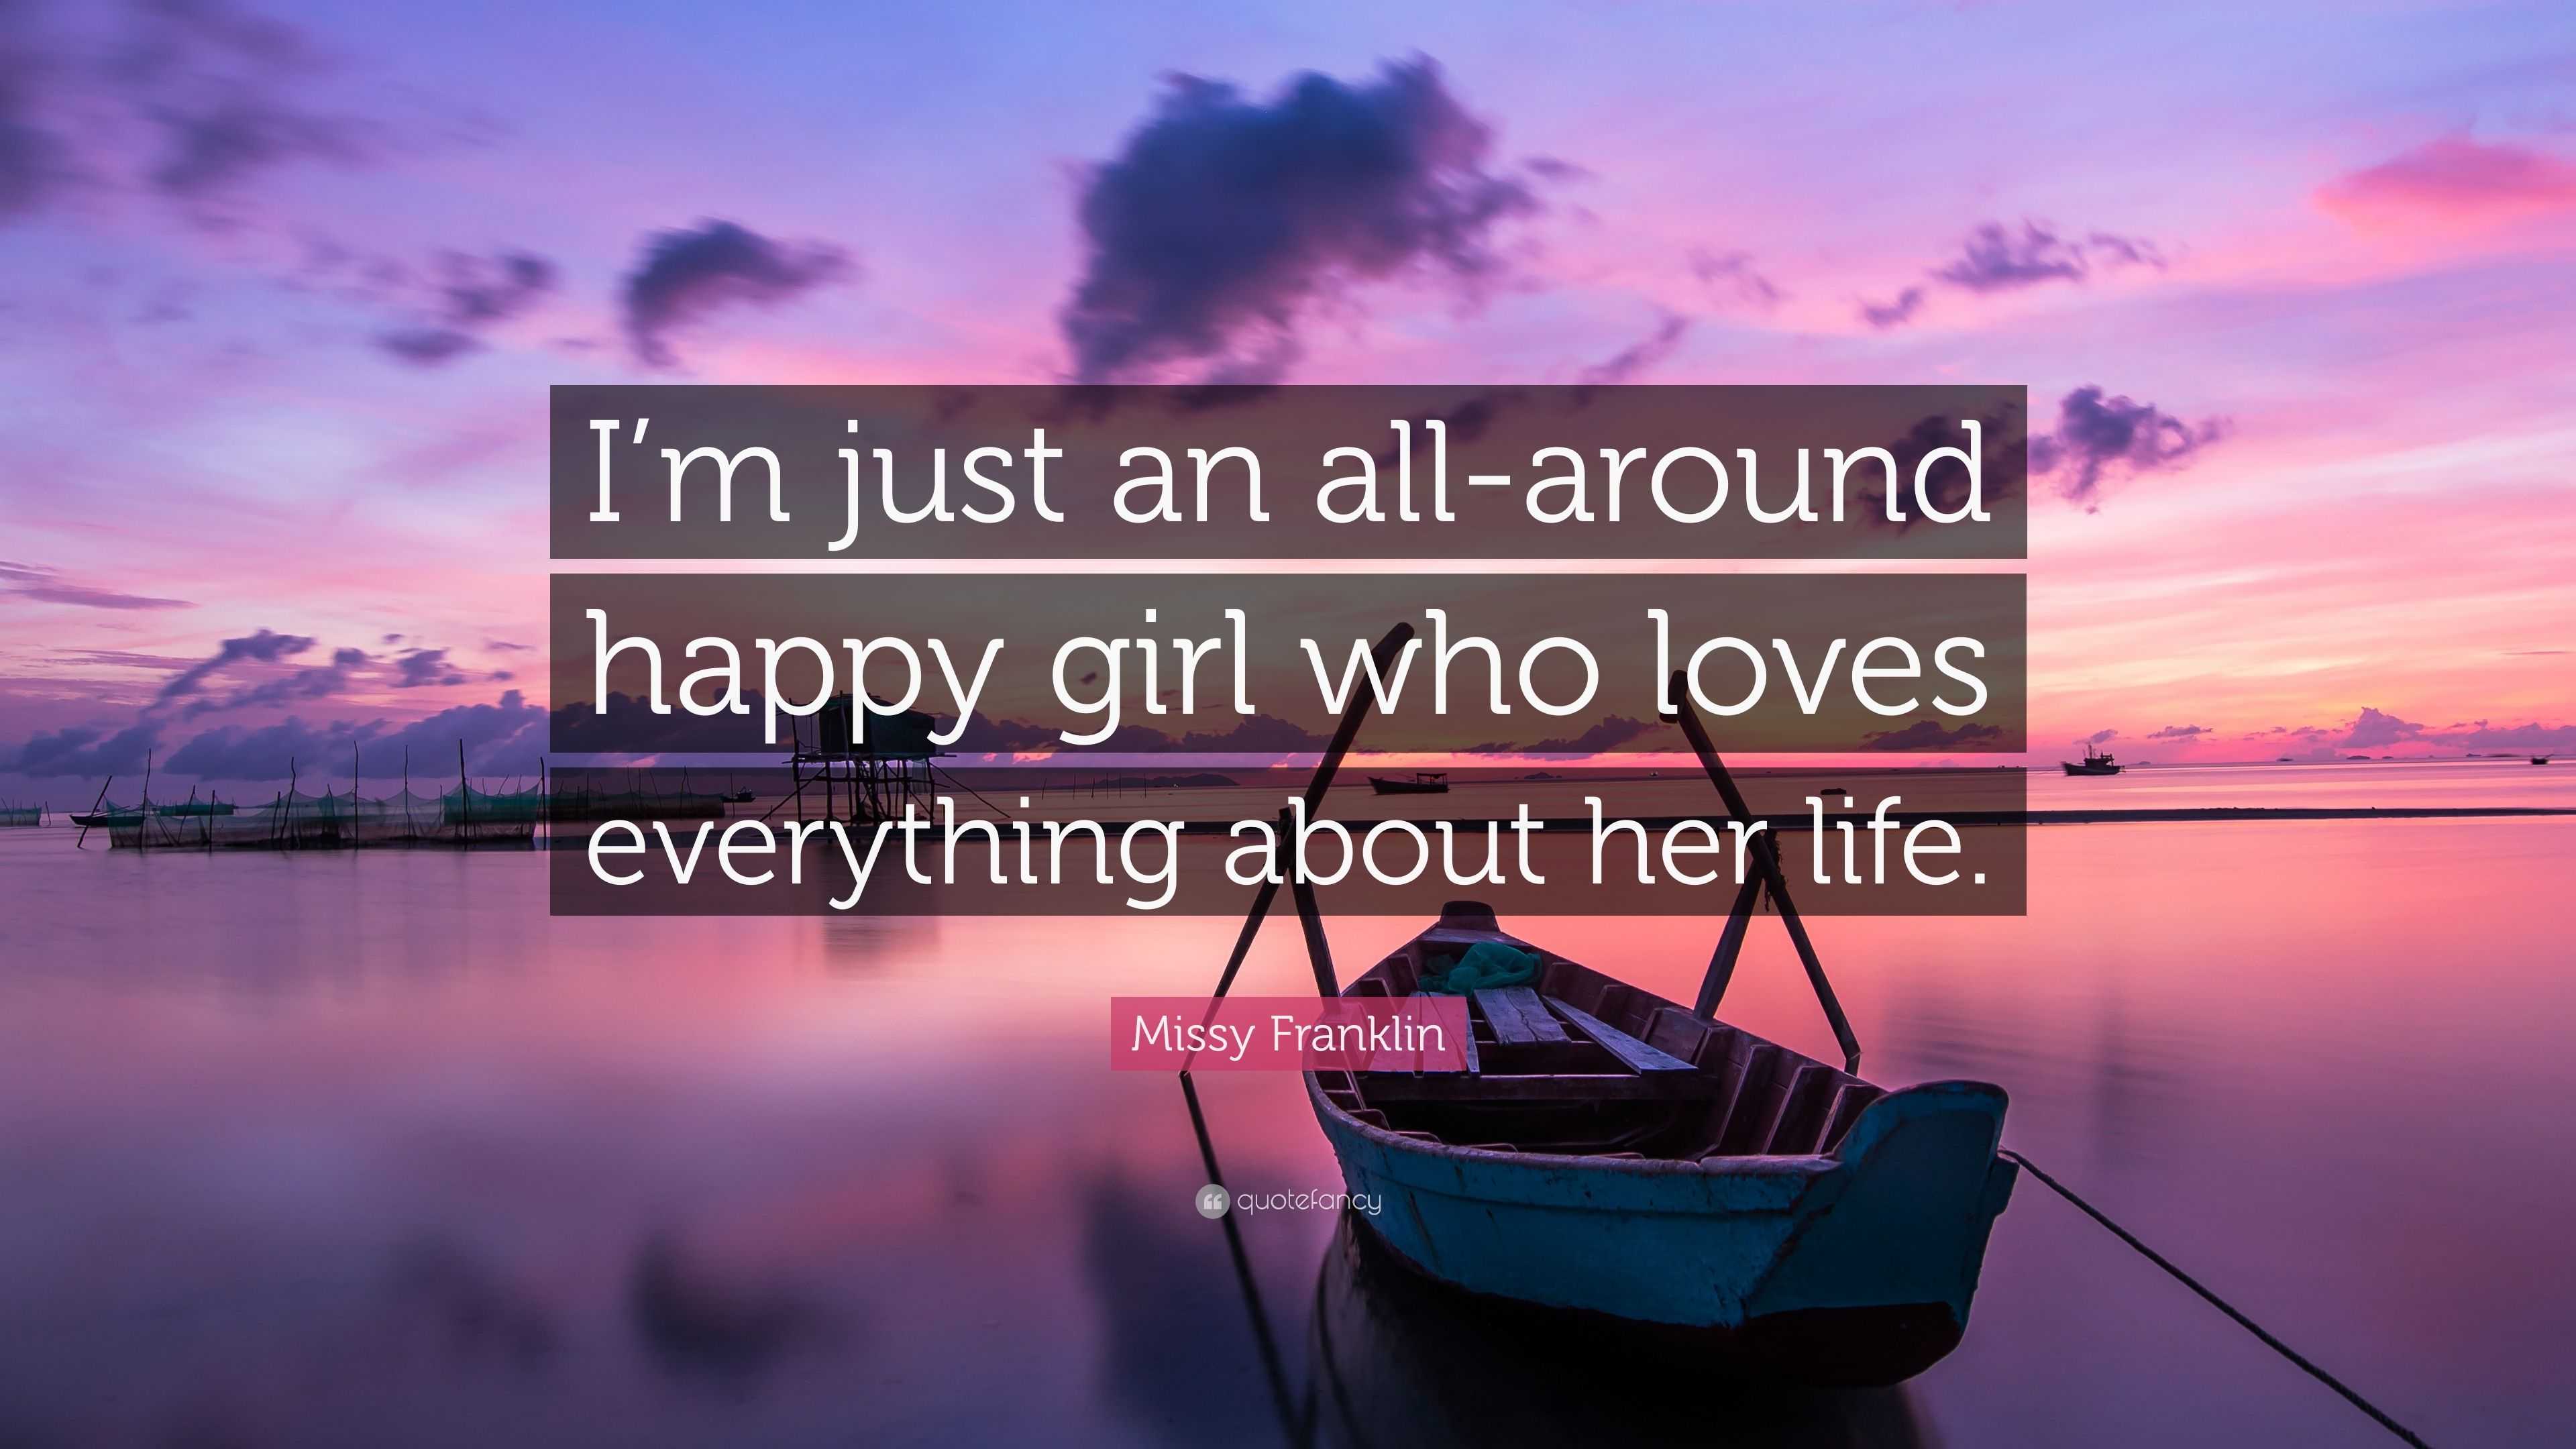 Missy Franklin Quote: "I'm just an all-around happy girl who loves everything about her life ...